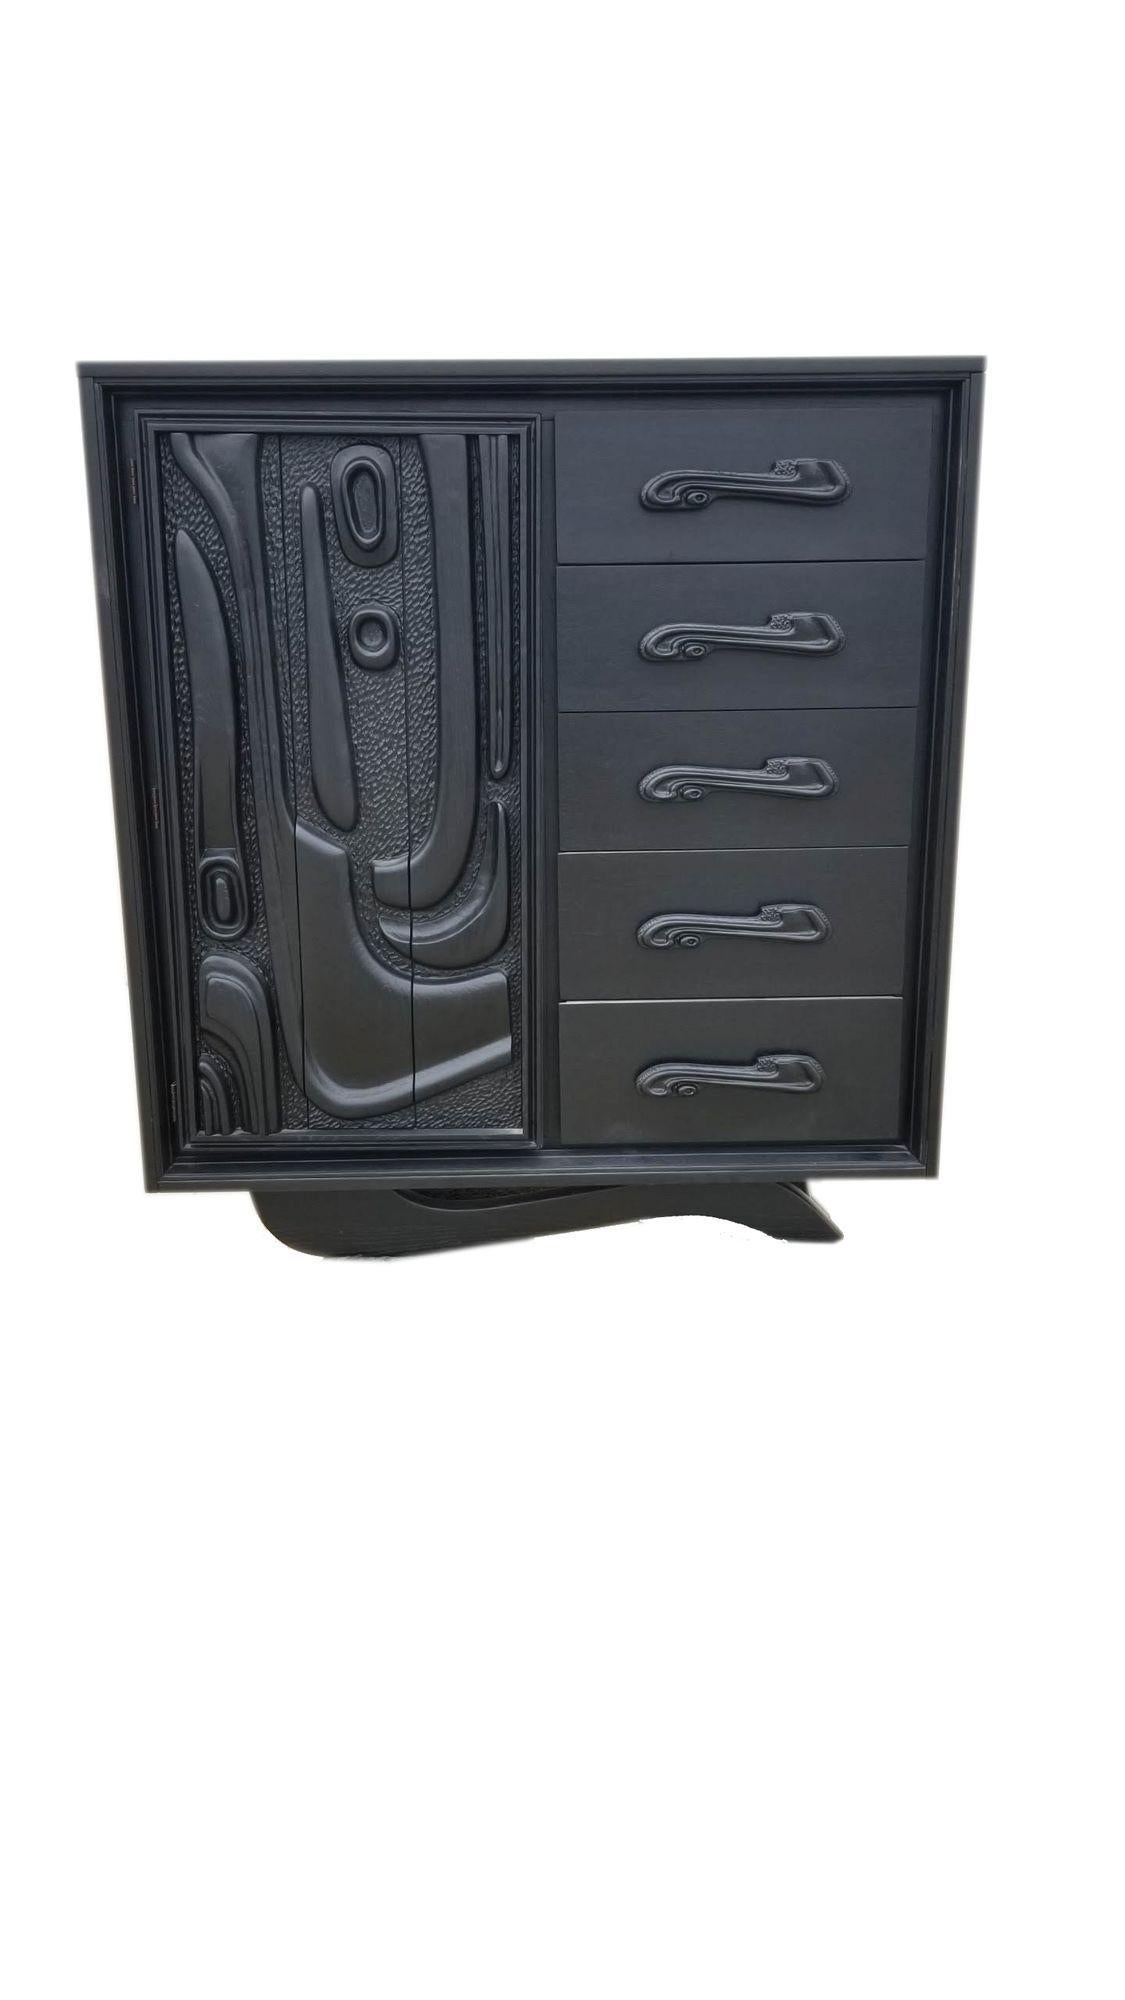 Late Mid-Century black lacquered sculpted walnut 'Oceanic' highboy dresser/armoire combo cabinet by Pulaski Furniture Corporation, circa 1965 which perfectly encapsulates the California surf mentality of the 1960s, making this piece a highly